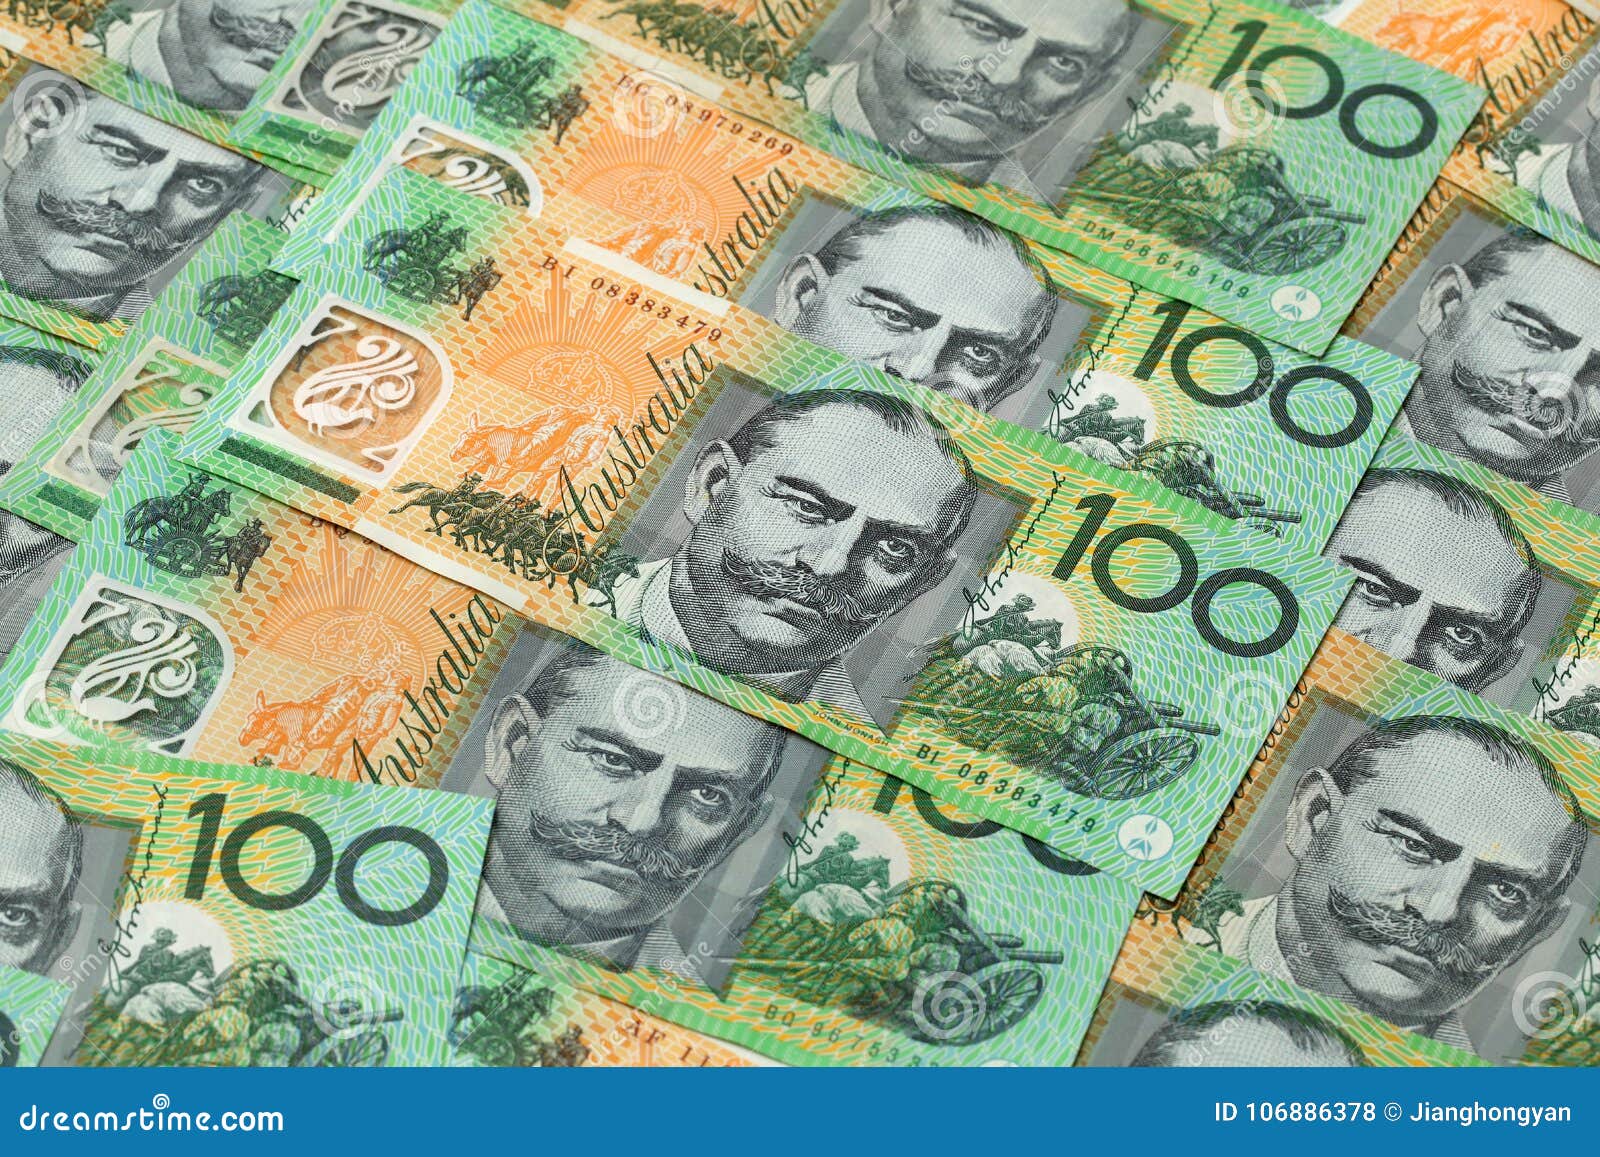 Australian Currency $100 Banknotes Stock Photo - Image of person, economy:  106886378